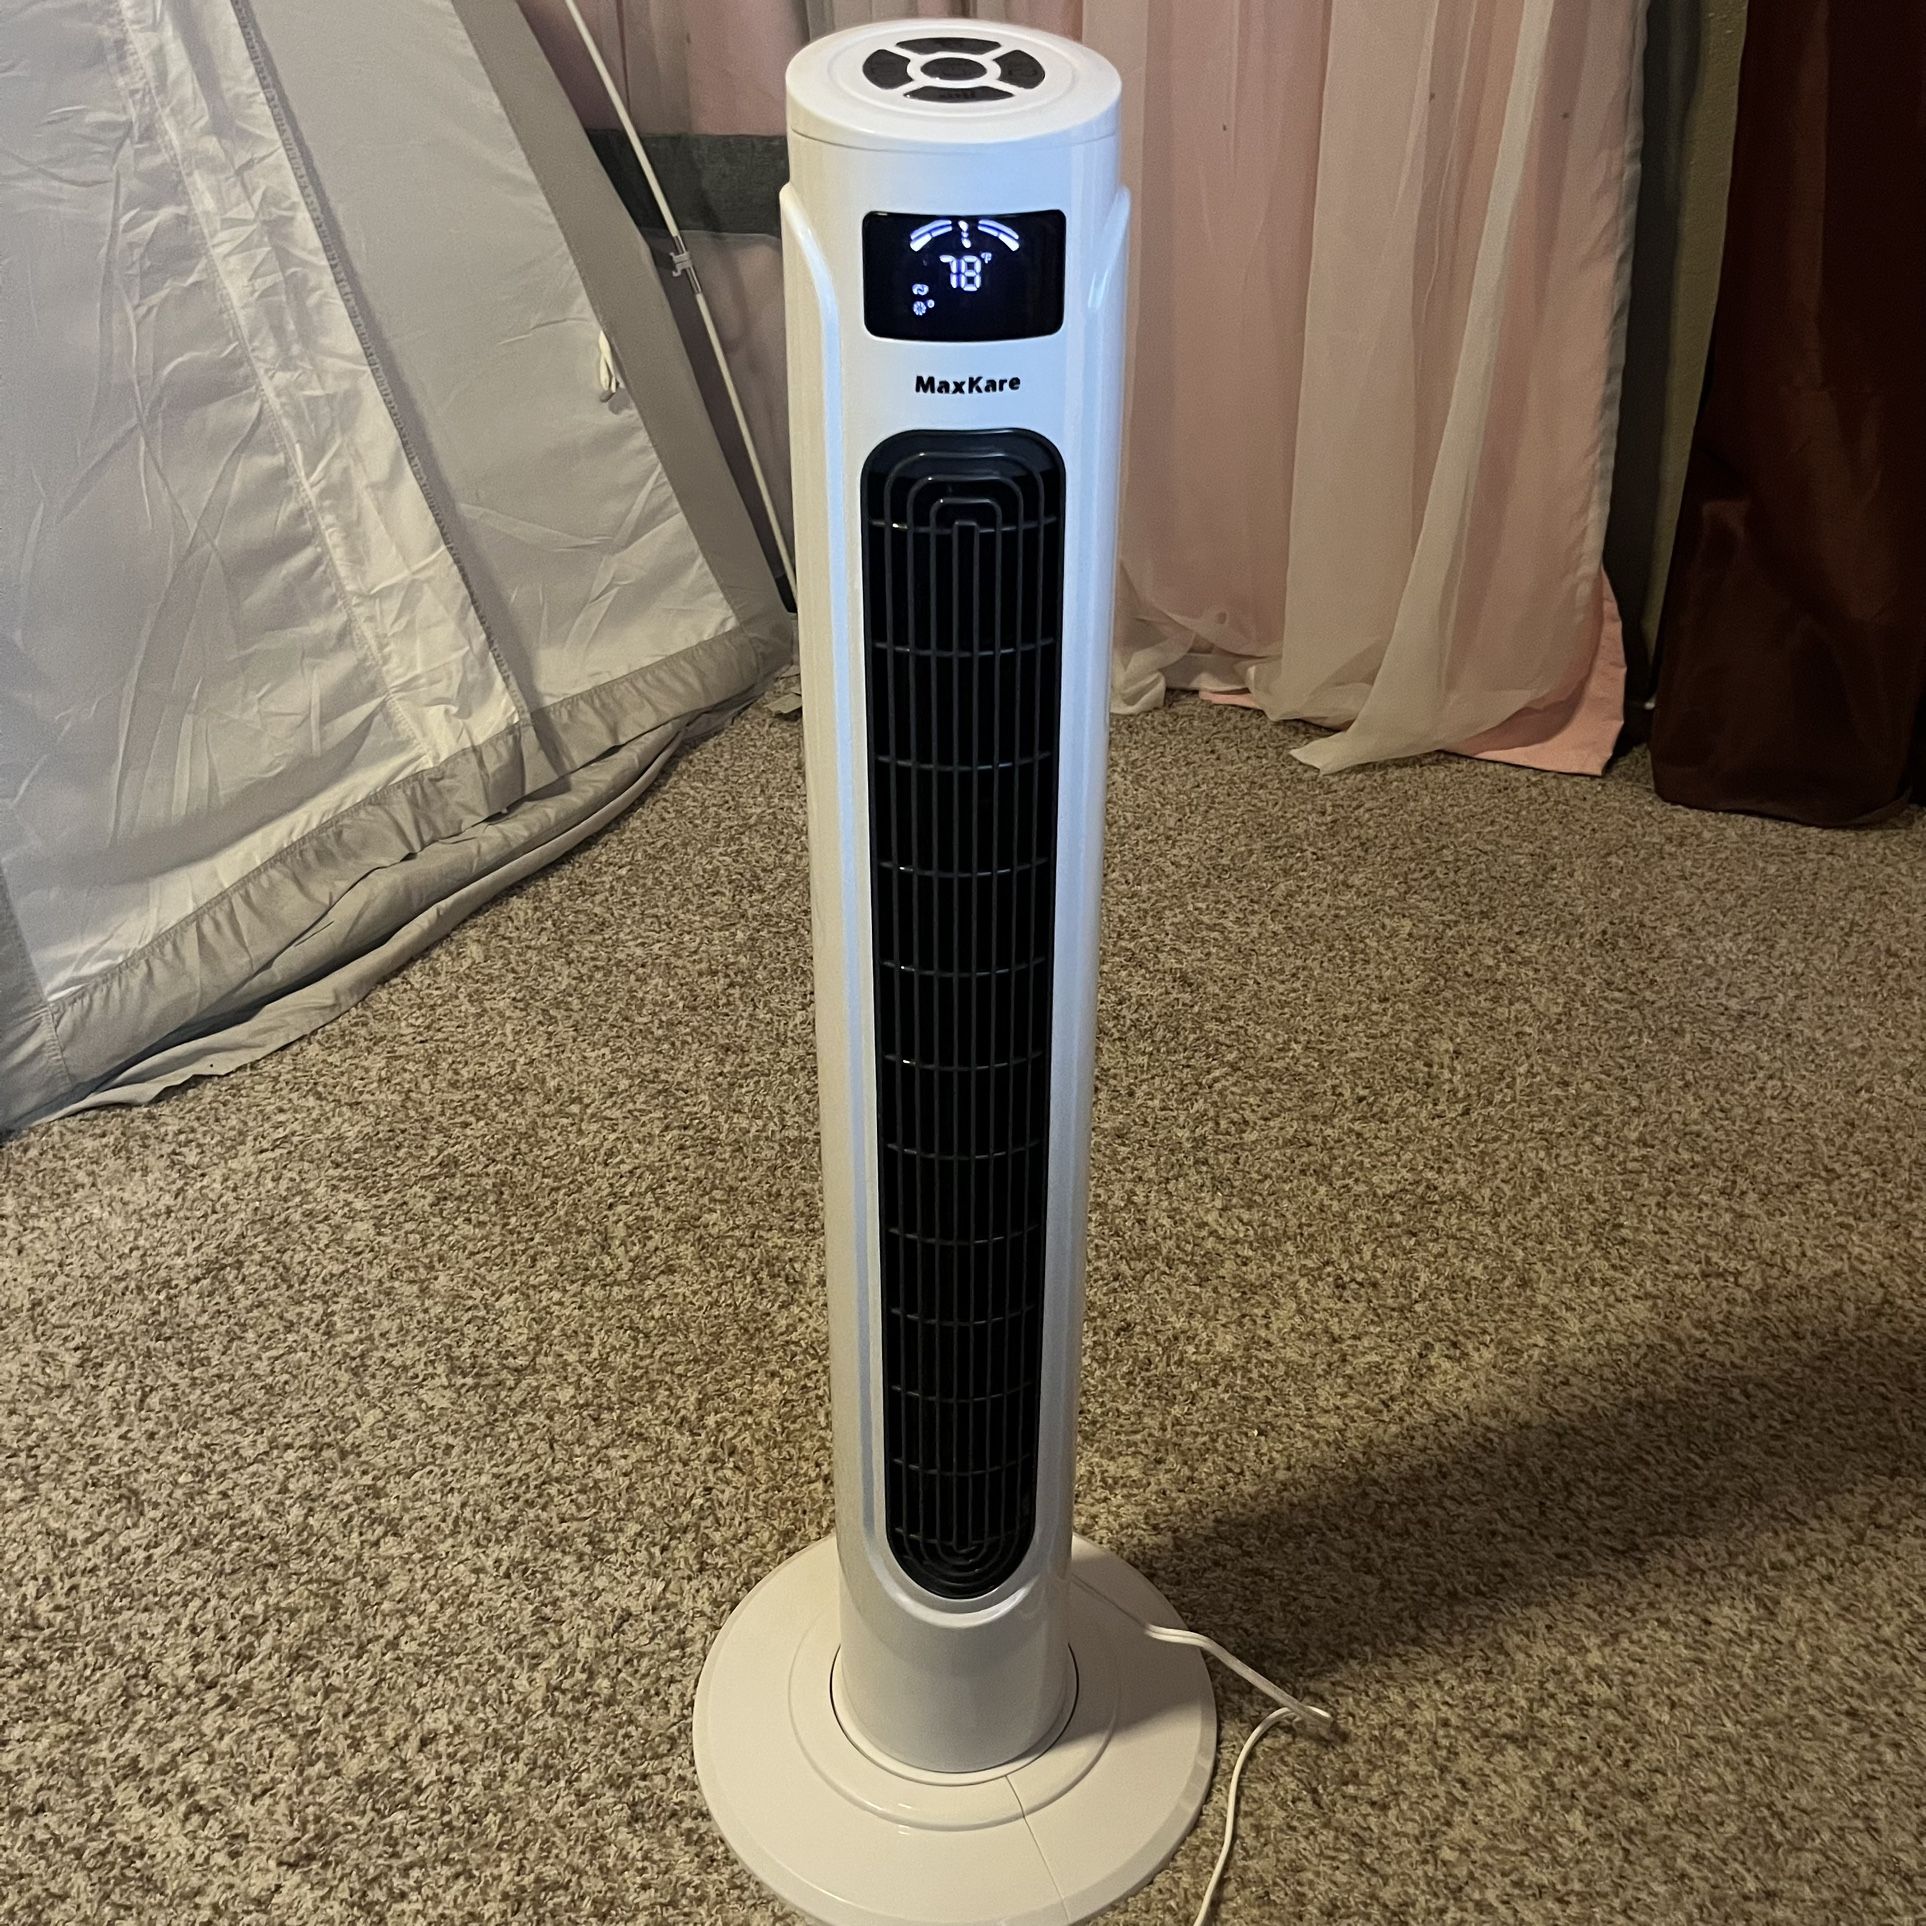 MaxKare 36" Tower Fan 75° Oscillating Fan 60dB Quiet Cooling Fan with Remote Control, 3 Speeds, 3 Wind Modes, Timer, LED Display, Standing Fan for Bed